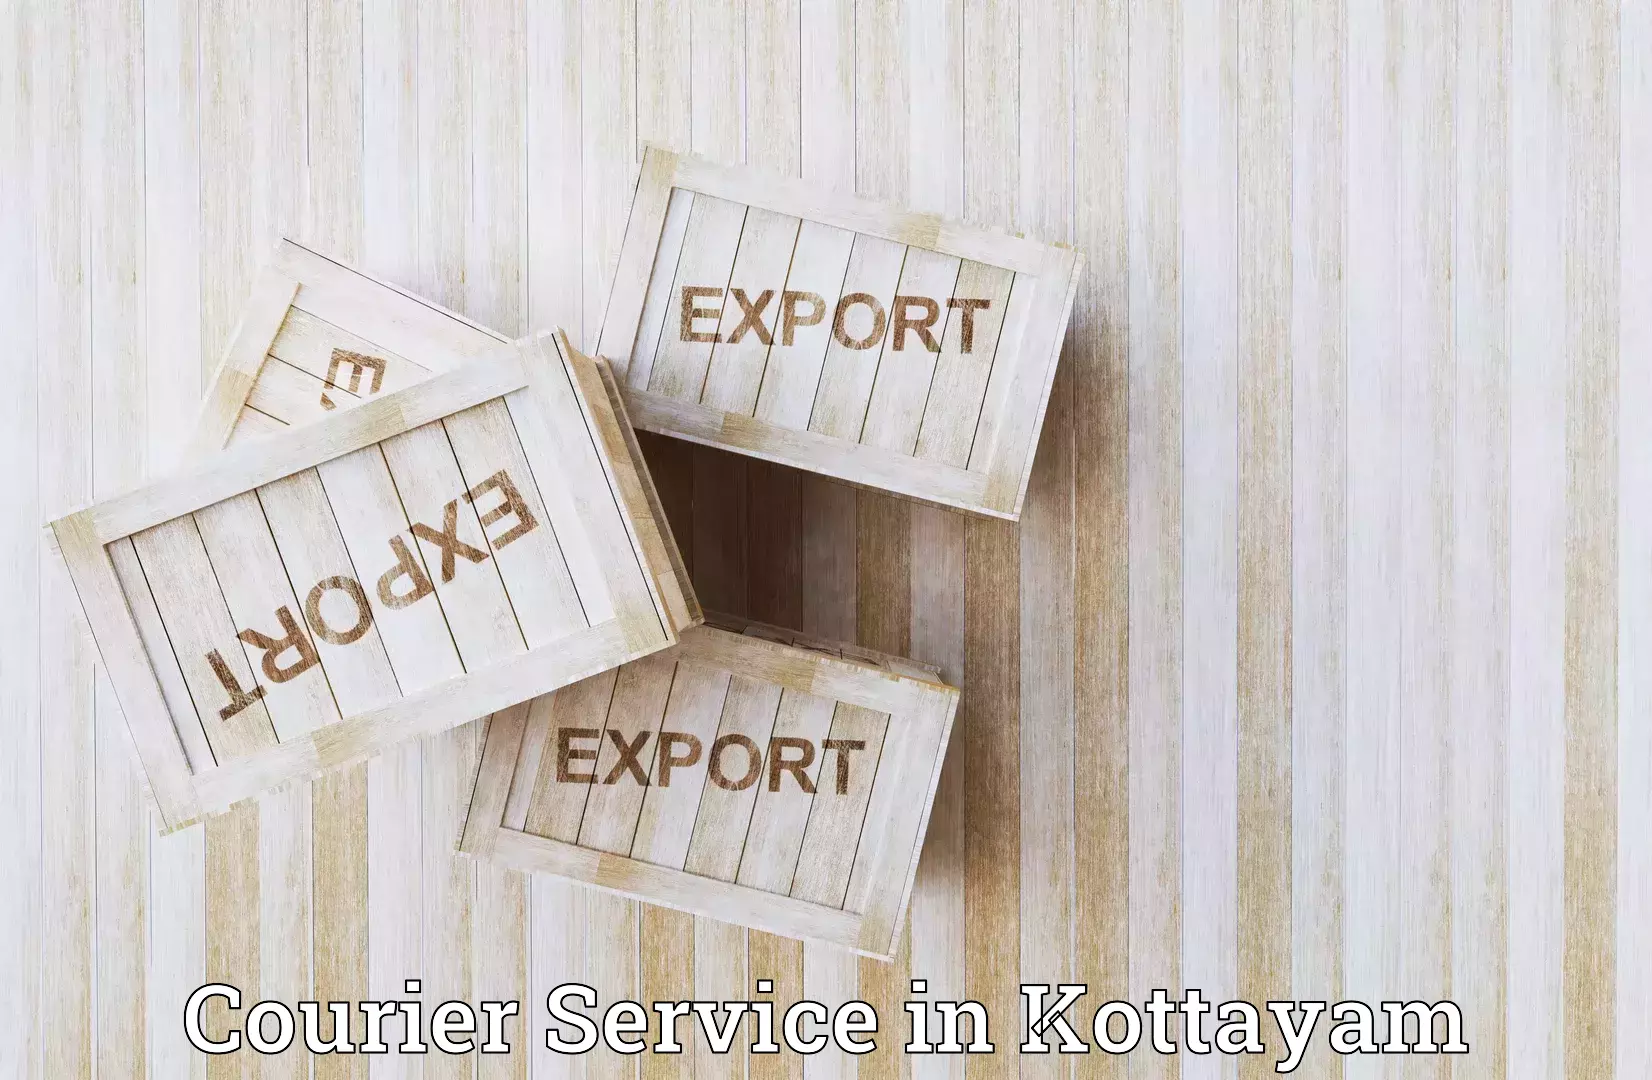 24-hour delivery options in Kottayam